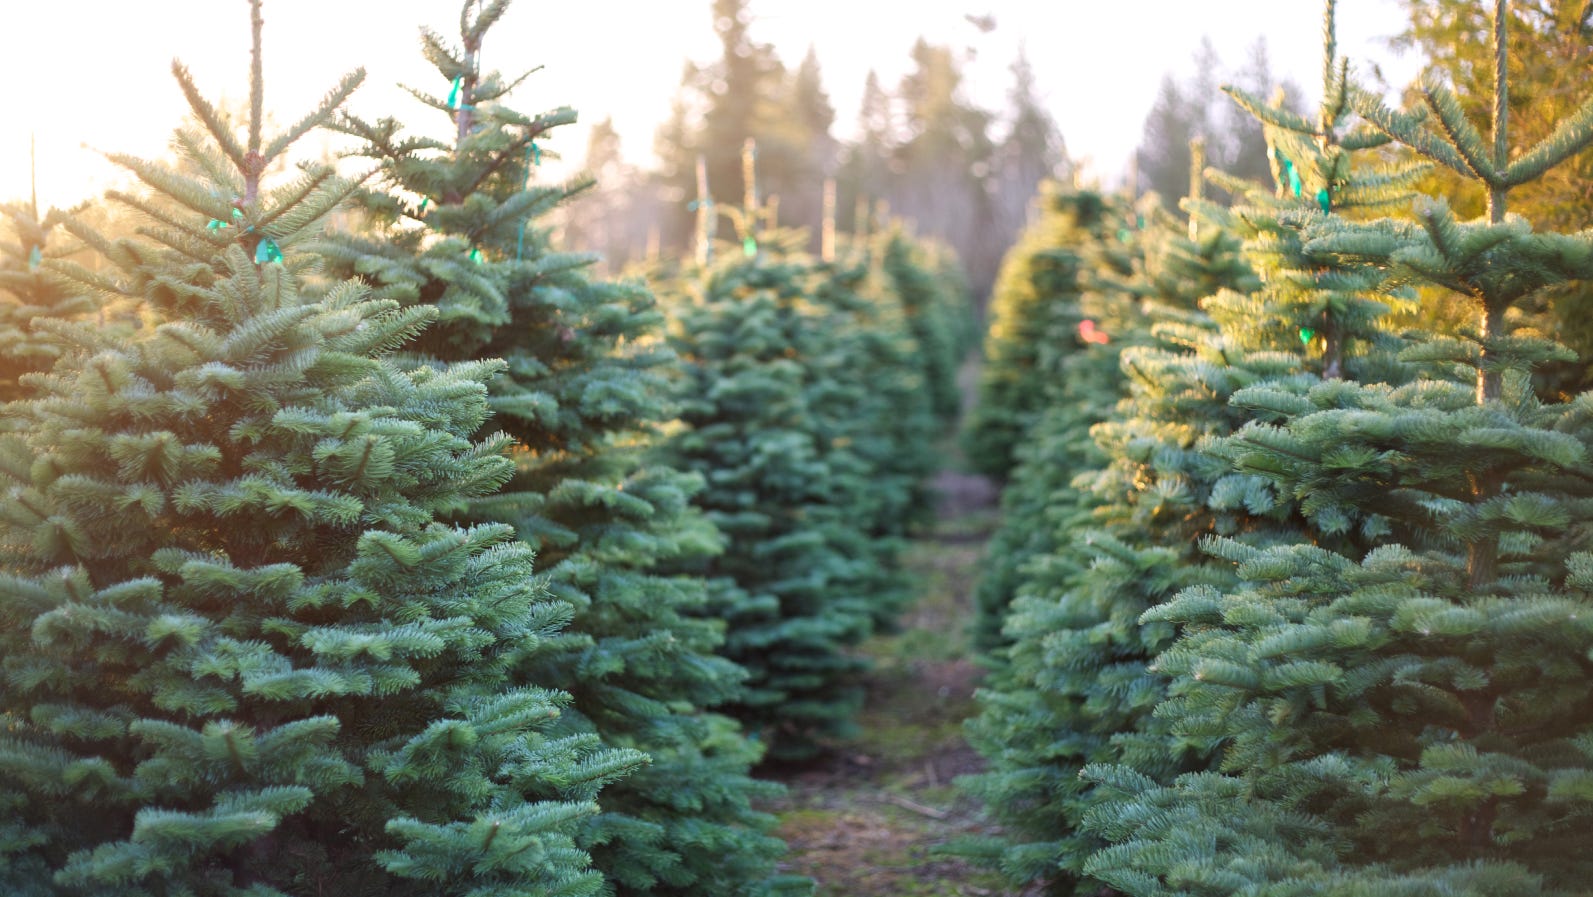 This Year's Artificial Christmas Trees: Here's What You Should Know